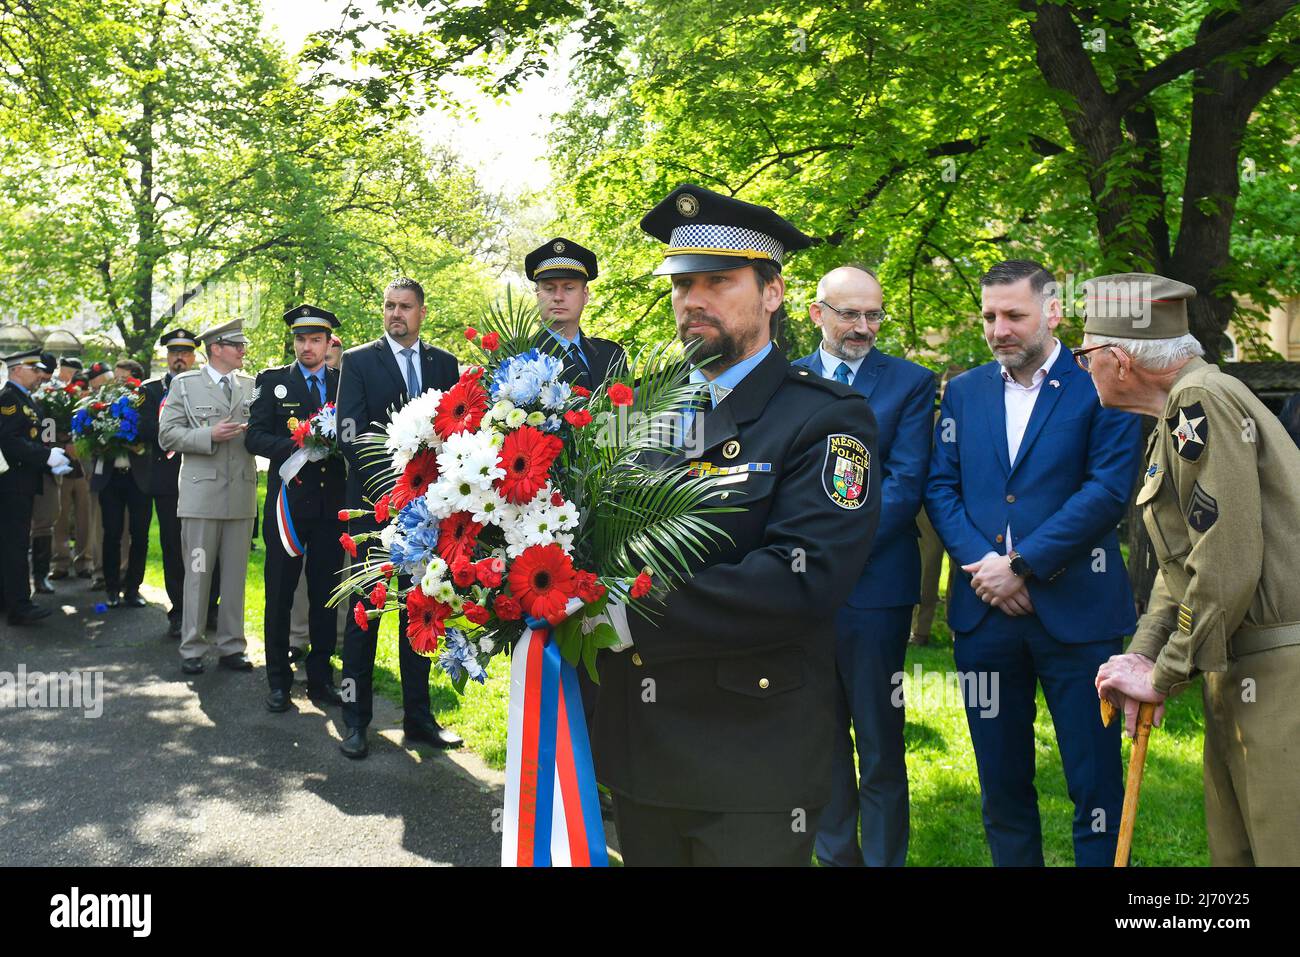 The 2nd Infantry Division memorial wreath laying ceremony within the Liberation Festival Pilsen - celebrations of the end of World War II - was held on May 5, 2022, in Pilsen, Czech Republic. (CTK Photo/Miroslav Chaloupka) Stock Photo